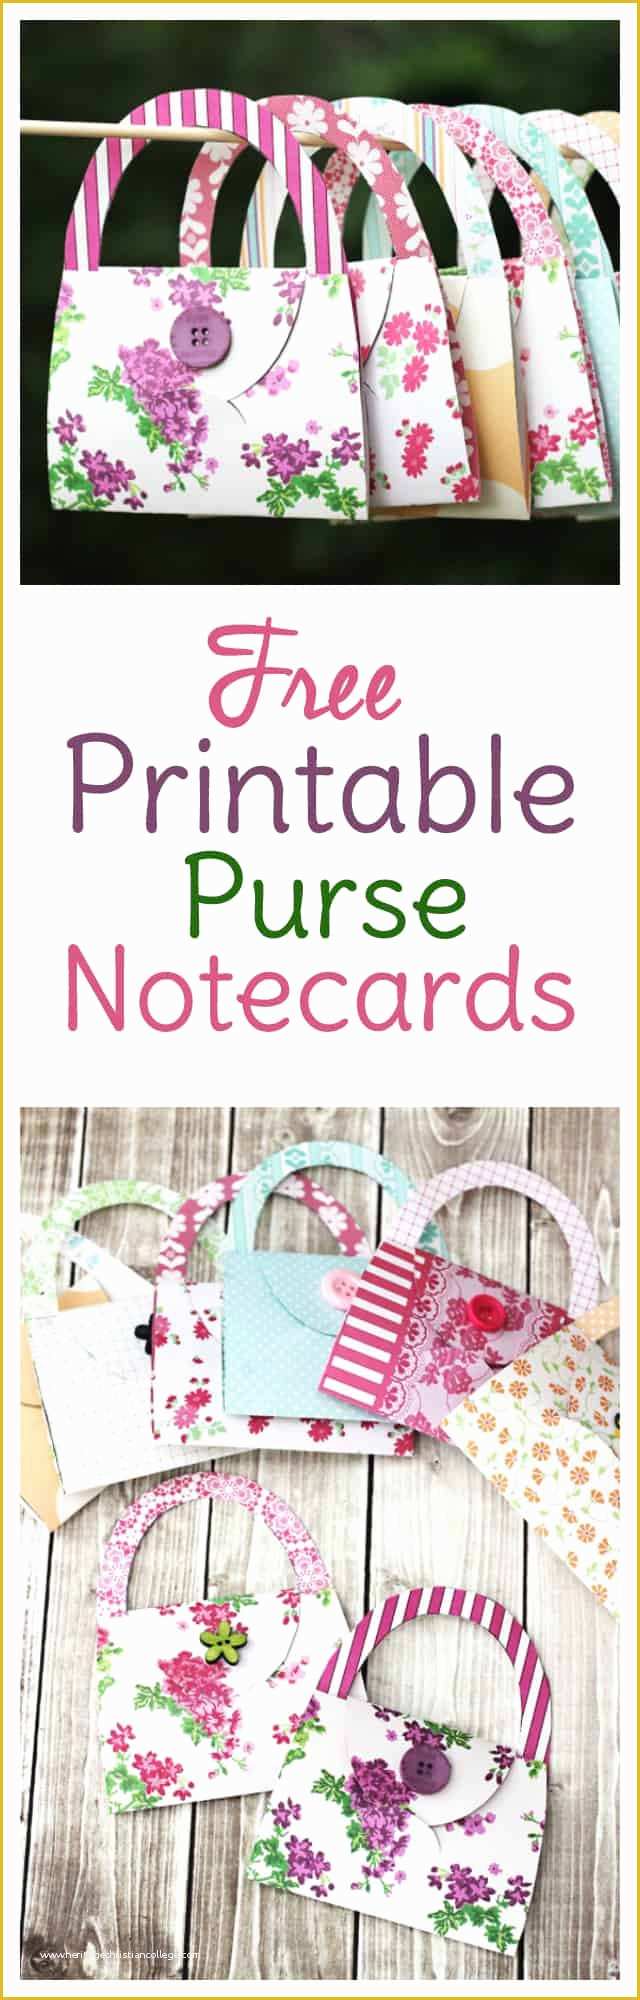 Free Card Making Templates Printable Of Free Printable Note Cards that Look Like Purses so Cute